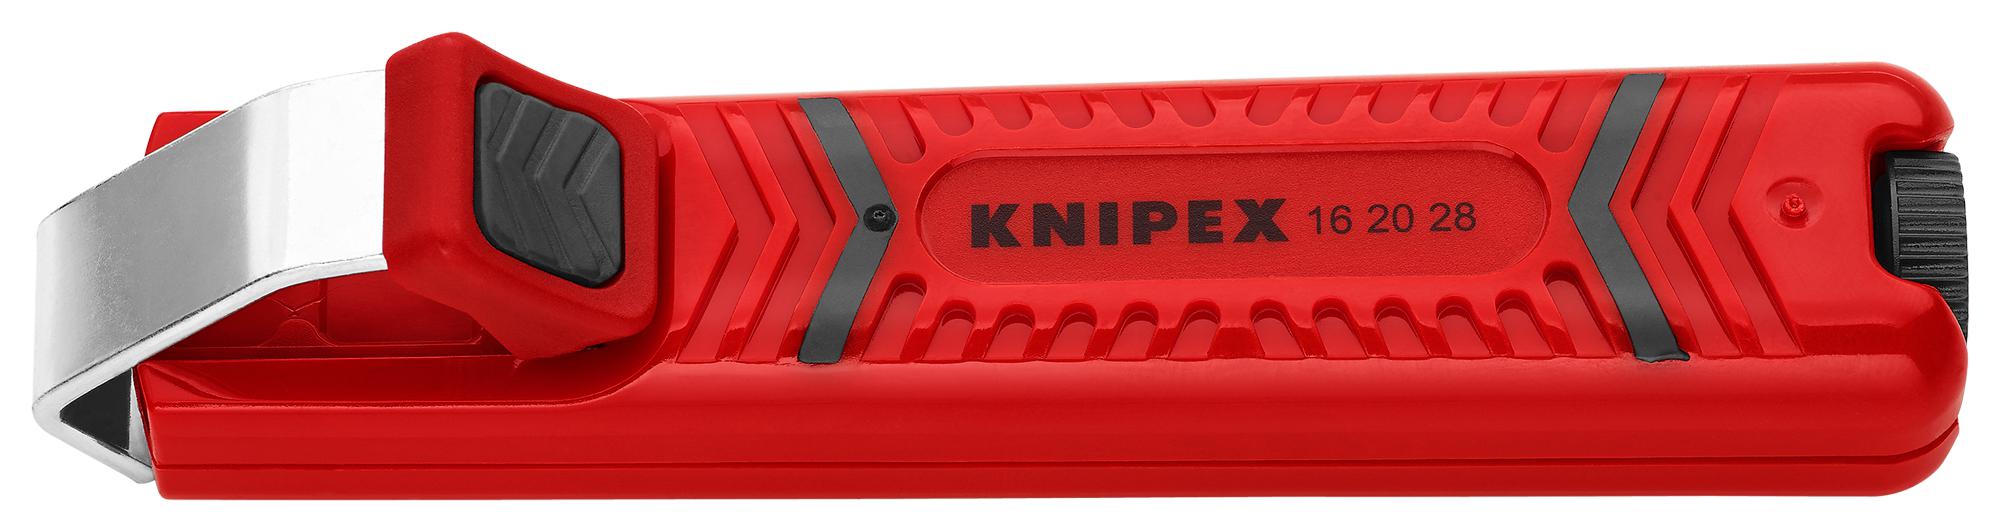 16 20 28 SB CABLE STRIPPING TOOL, 8-28MM KNIPEX